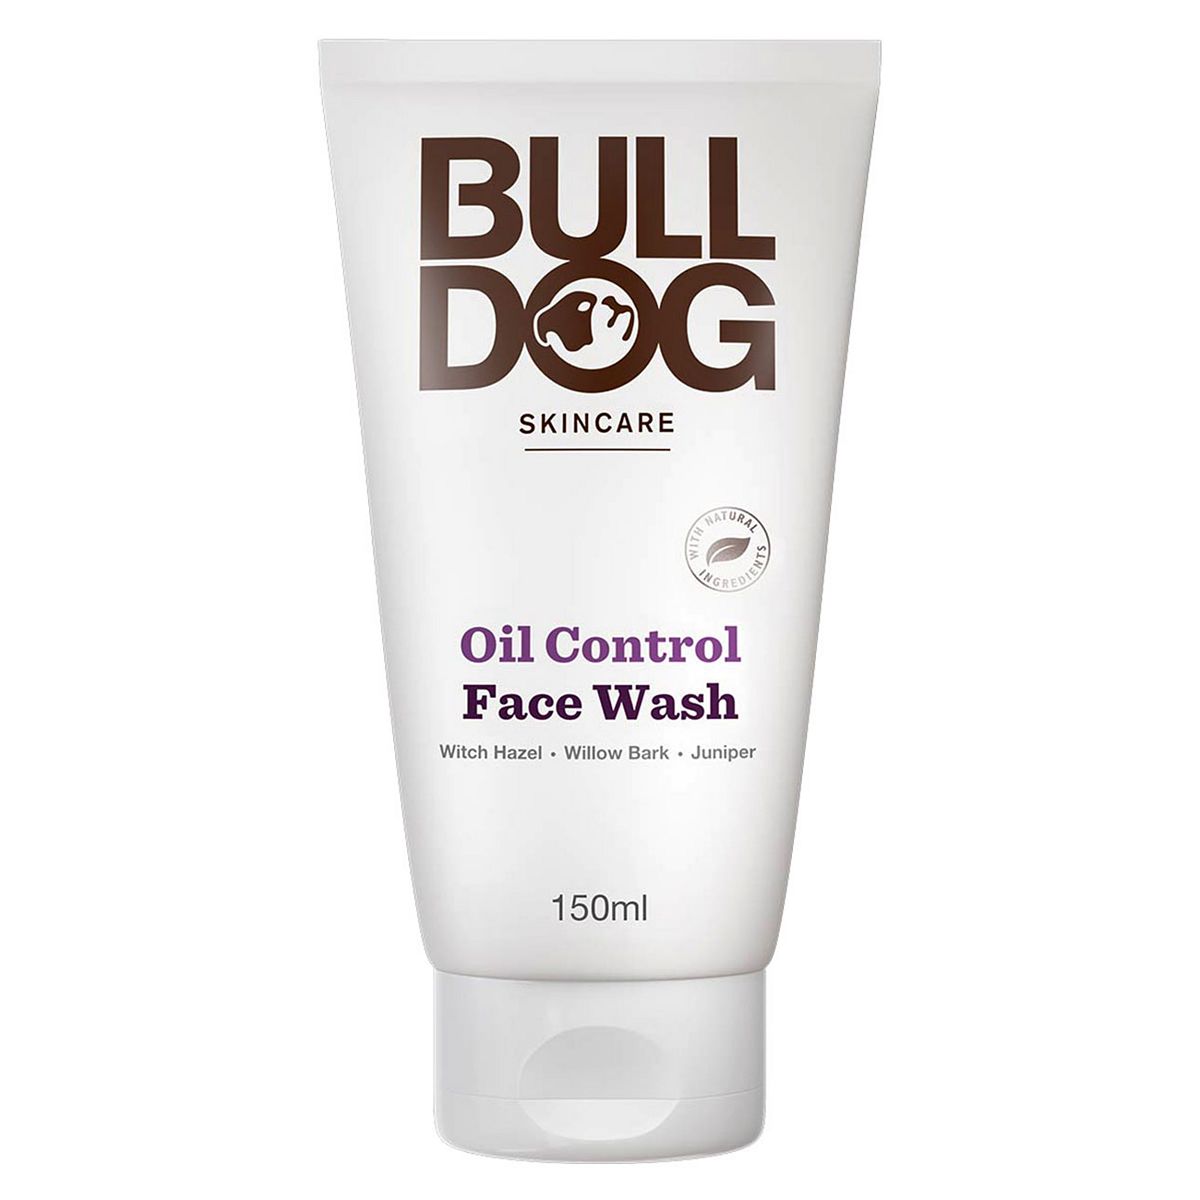 Bulldog Oil Control Face Wash 150ml Activity Placemats Boots   